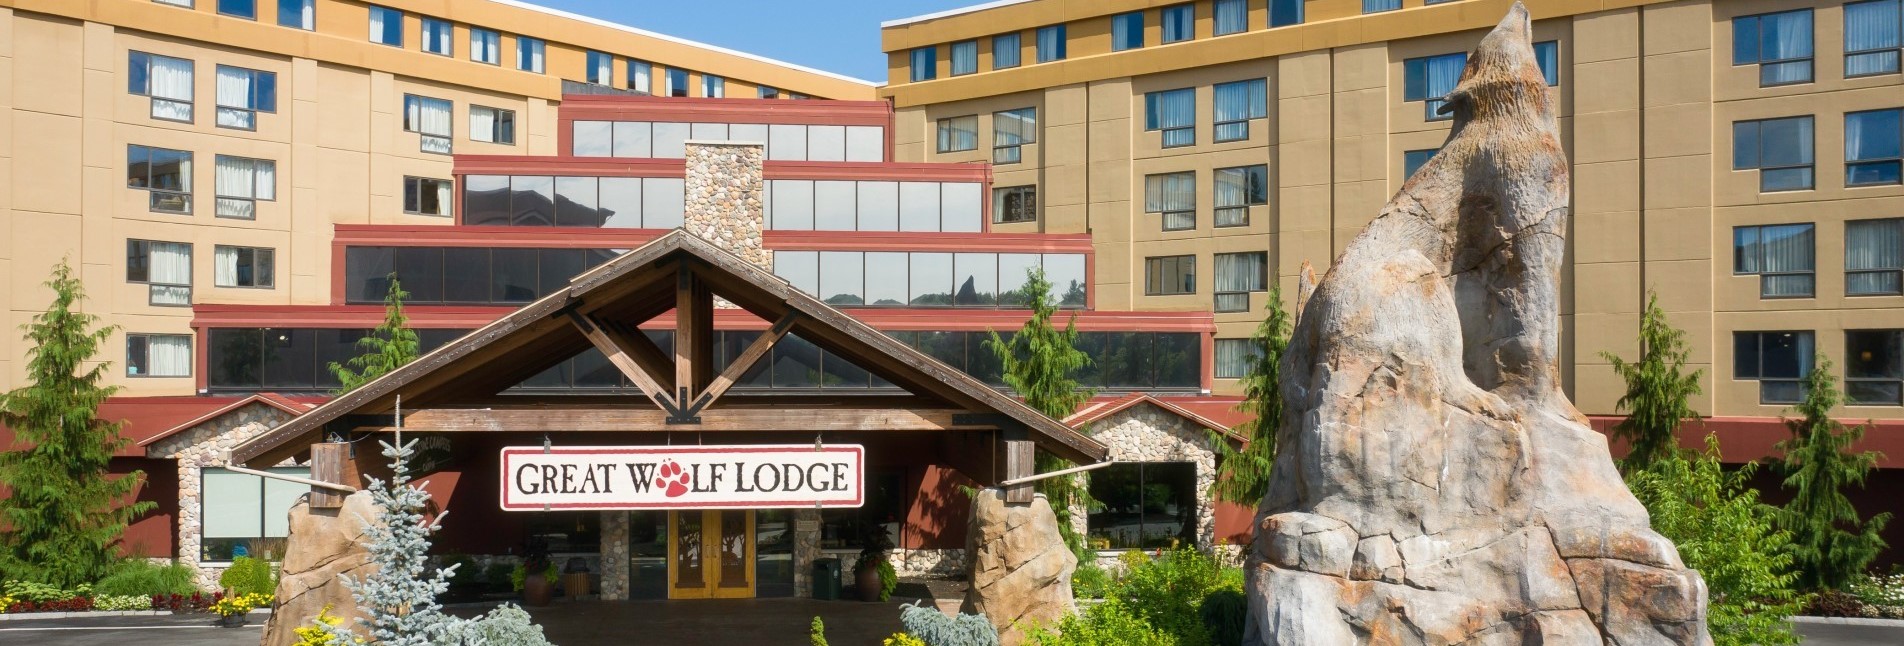 Great wolf lodge New England